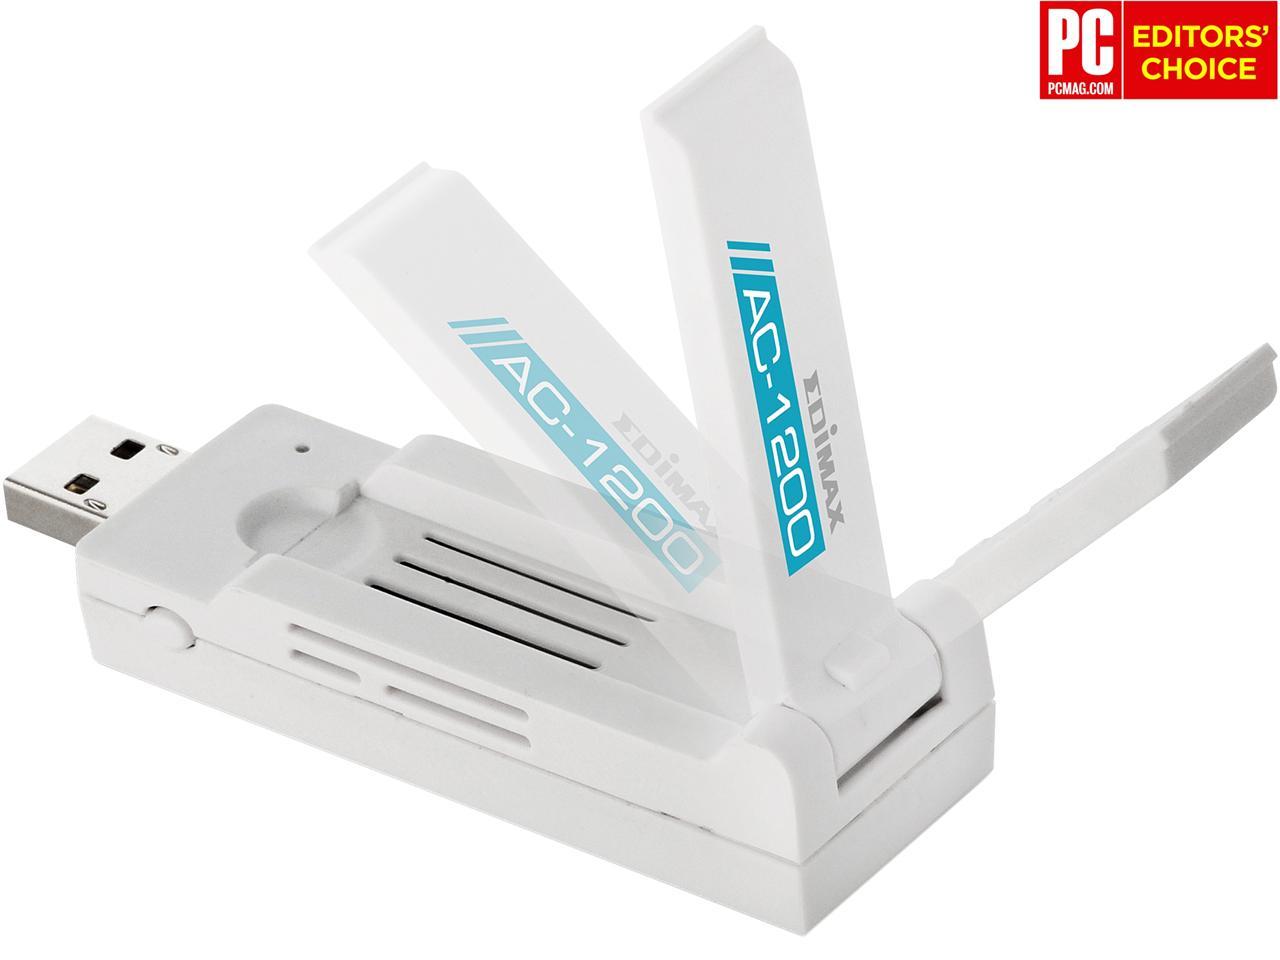 Edimax EW-7822UAC Wireless AC1200 Dual-band USB 3.0 Adapter, Complies to Draft 802.11ac Standard, Delivers More Than Two Times Faster Wi-Fi Speed Than 802.11n, With Adjustable Foldaway Antenna for Optimum High Performance